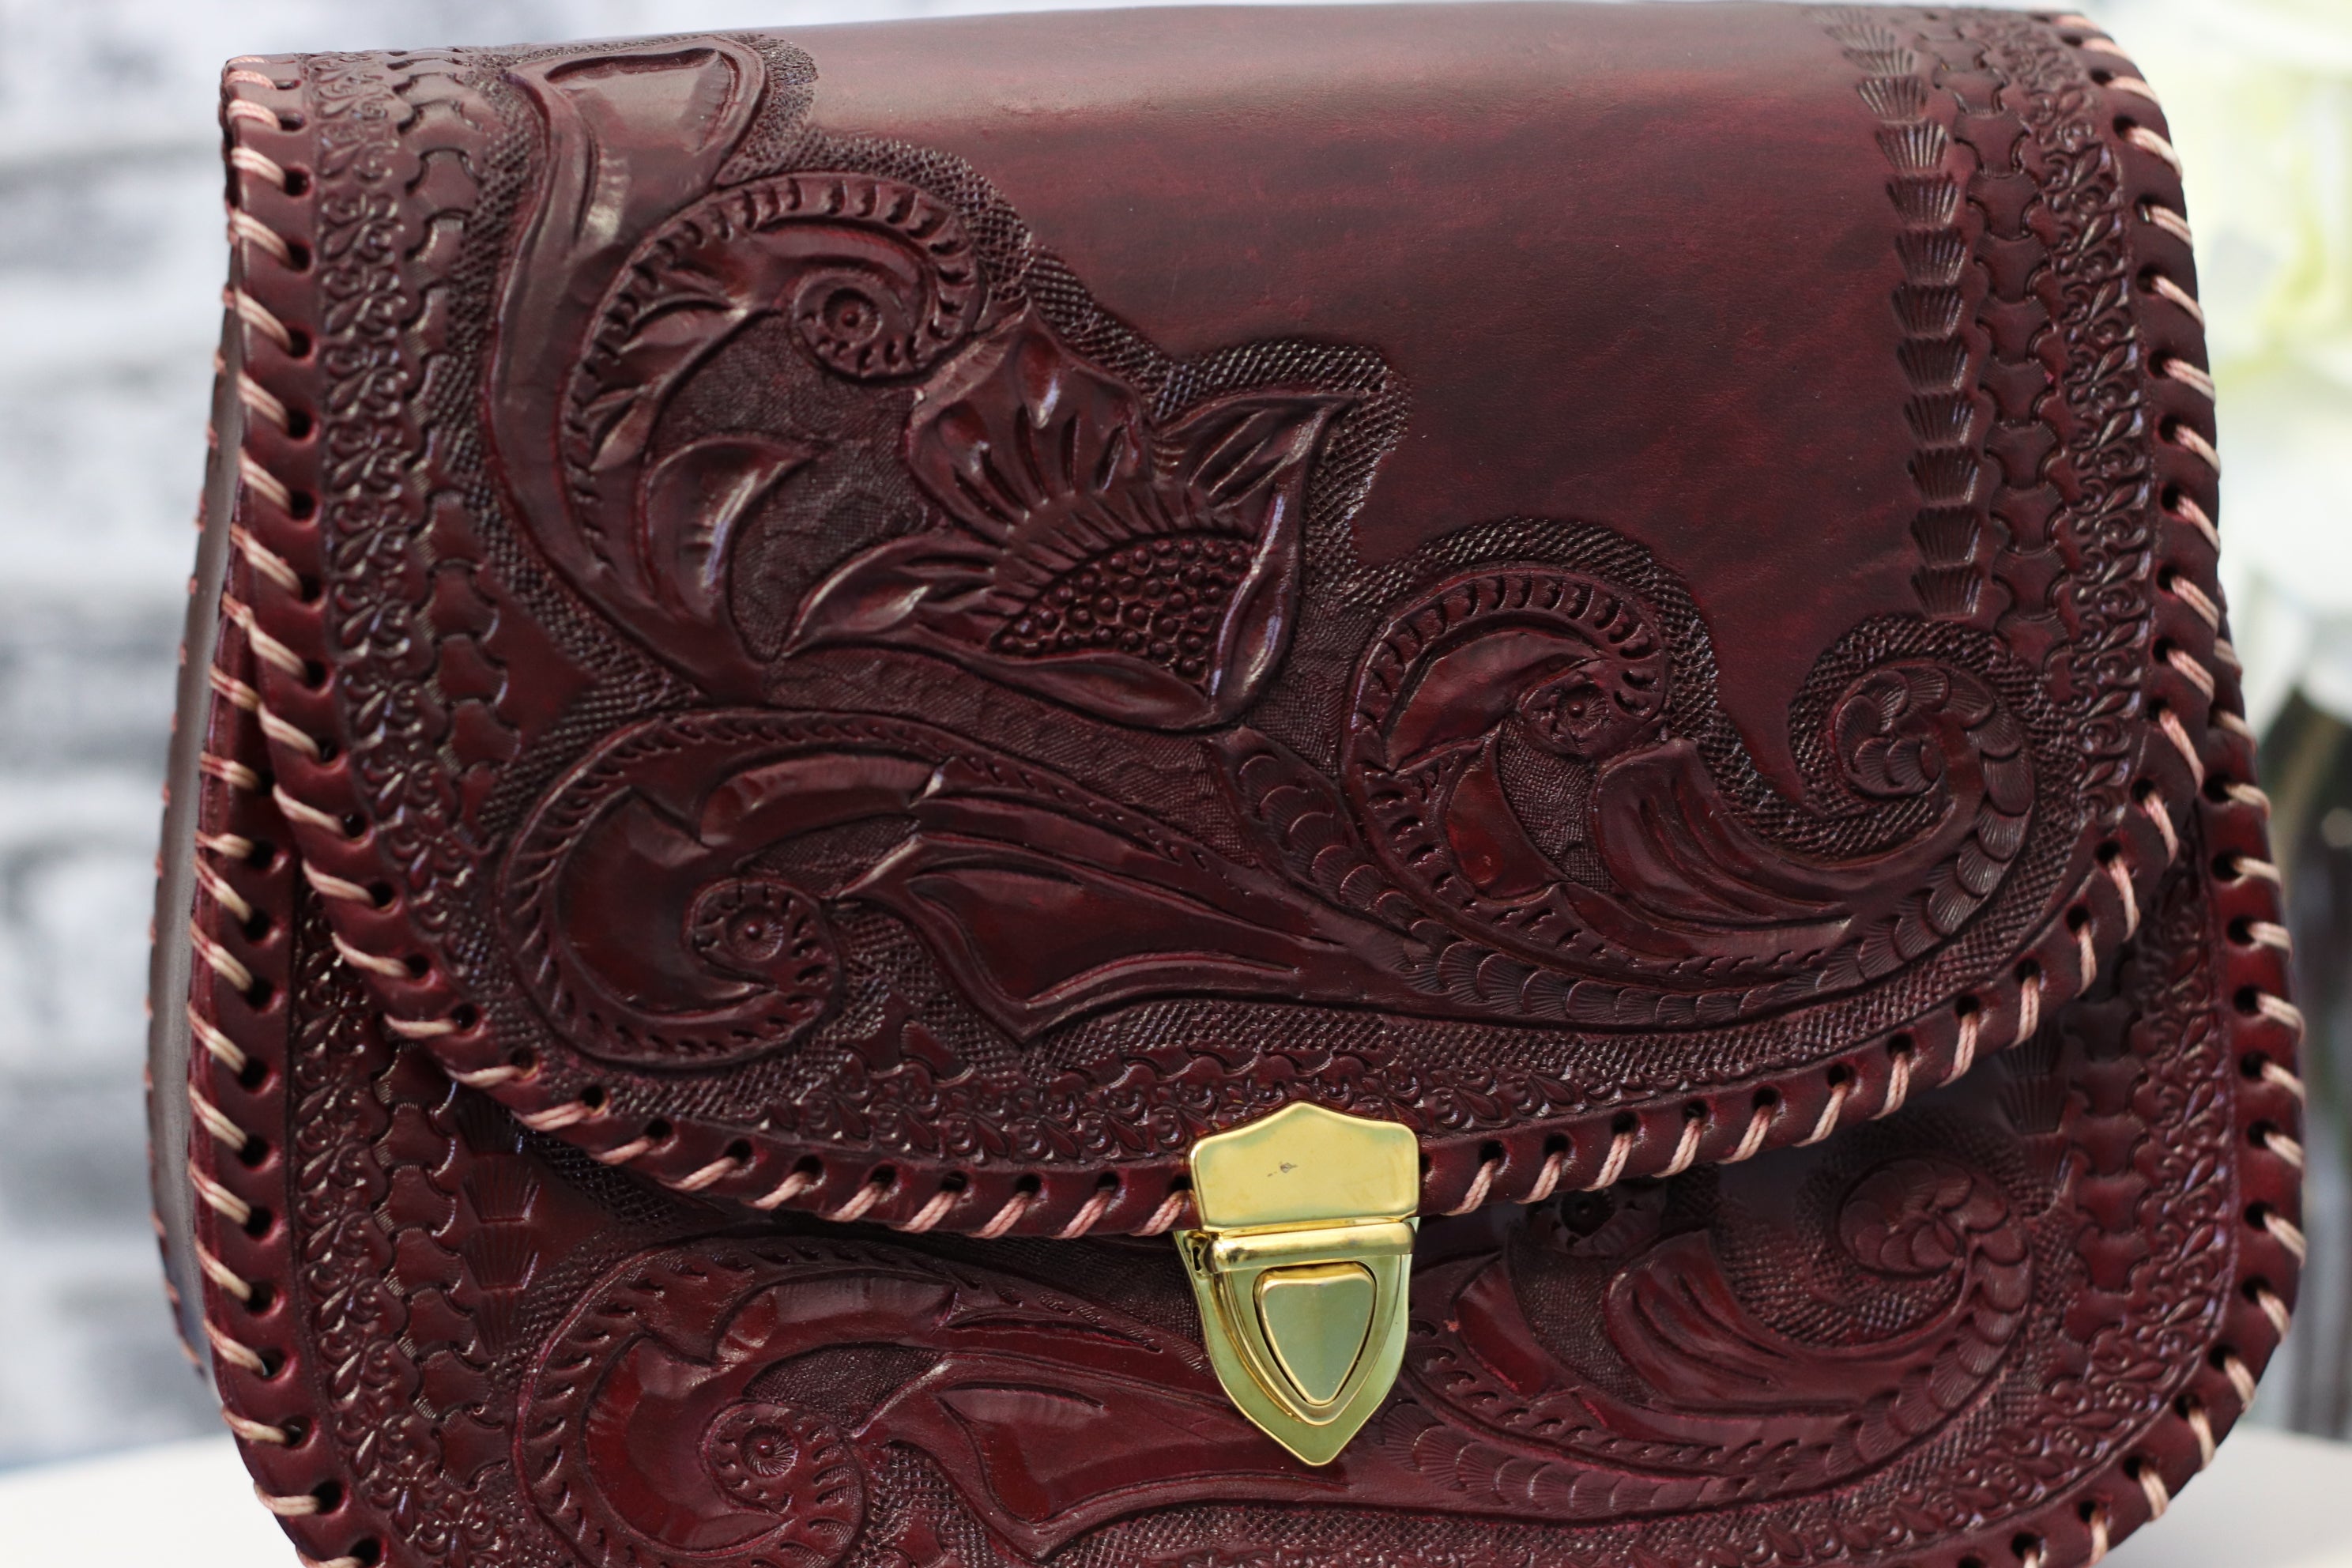 Wine color leather clutch,hand-tooled leather with gold clasp closure. Clutch Handbag. Made by artisans in Central Mexico, shipping from the USA. Handmade. Buy now at www.felipeandgrace.com. 